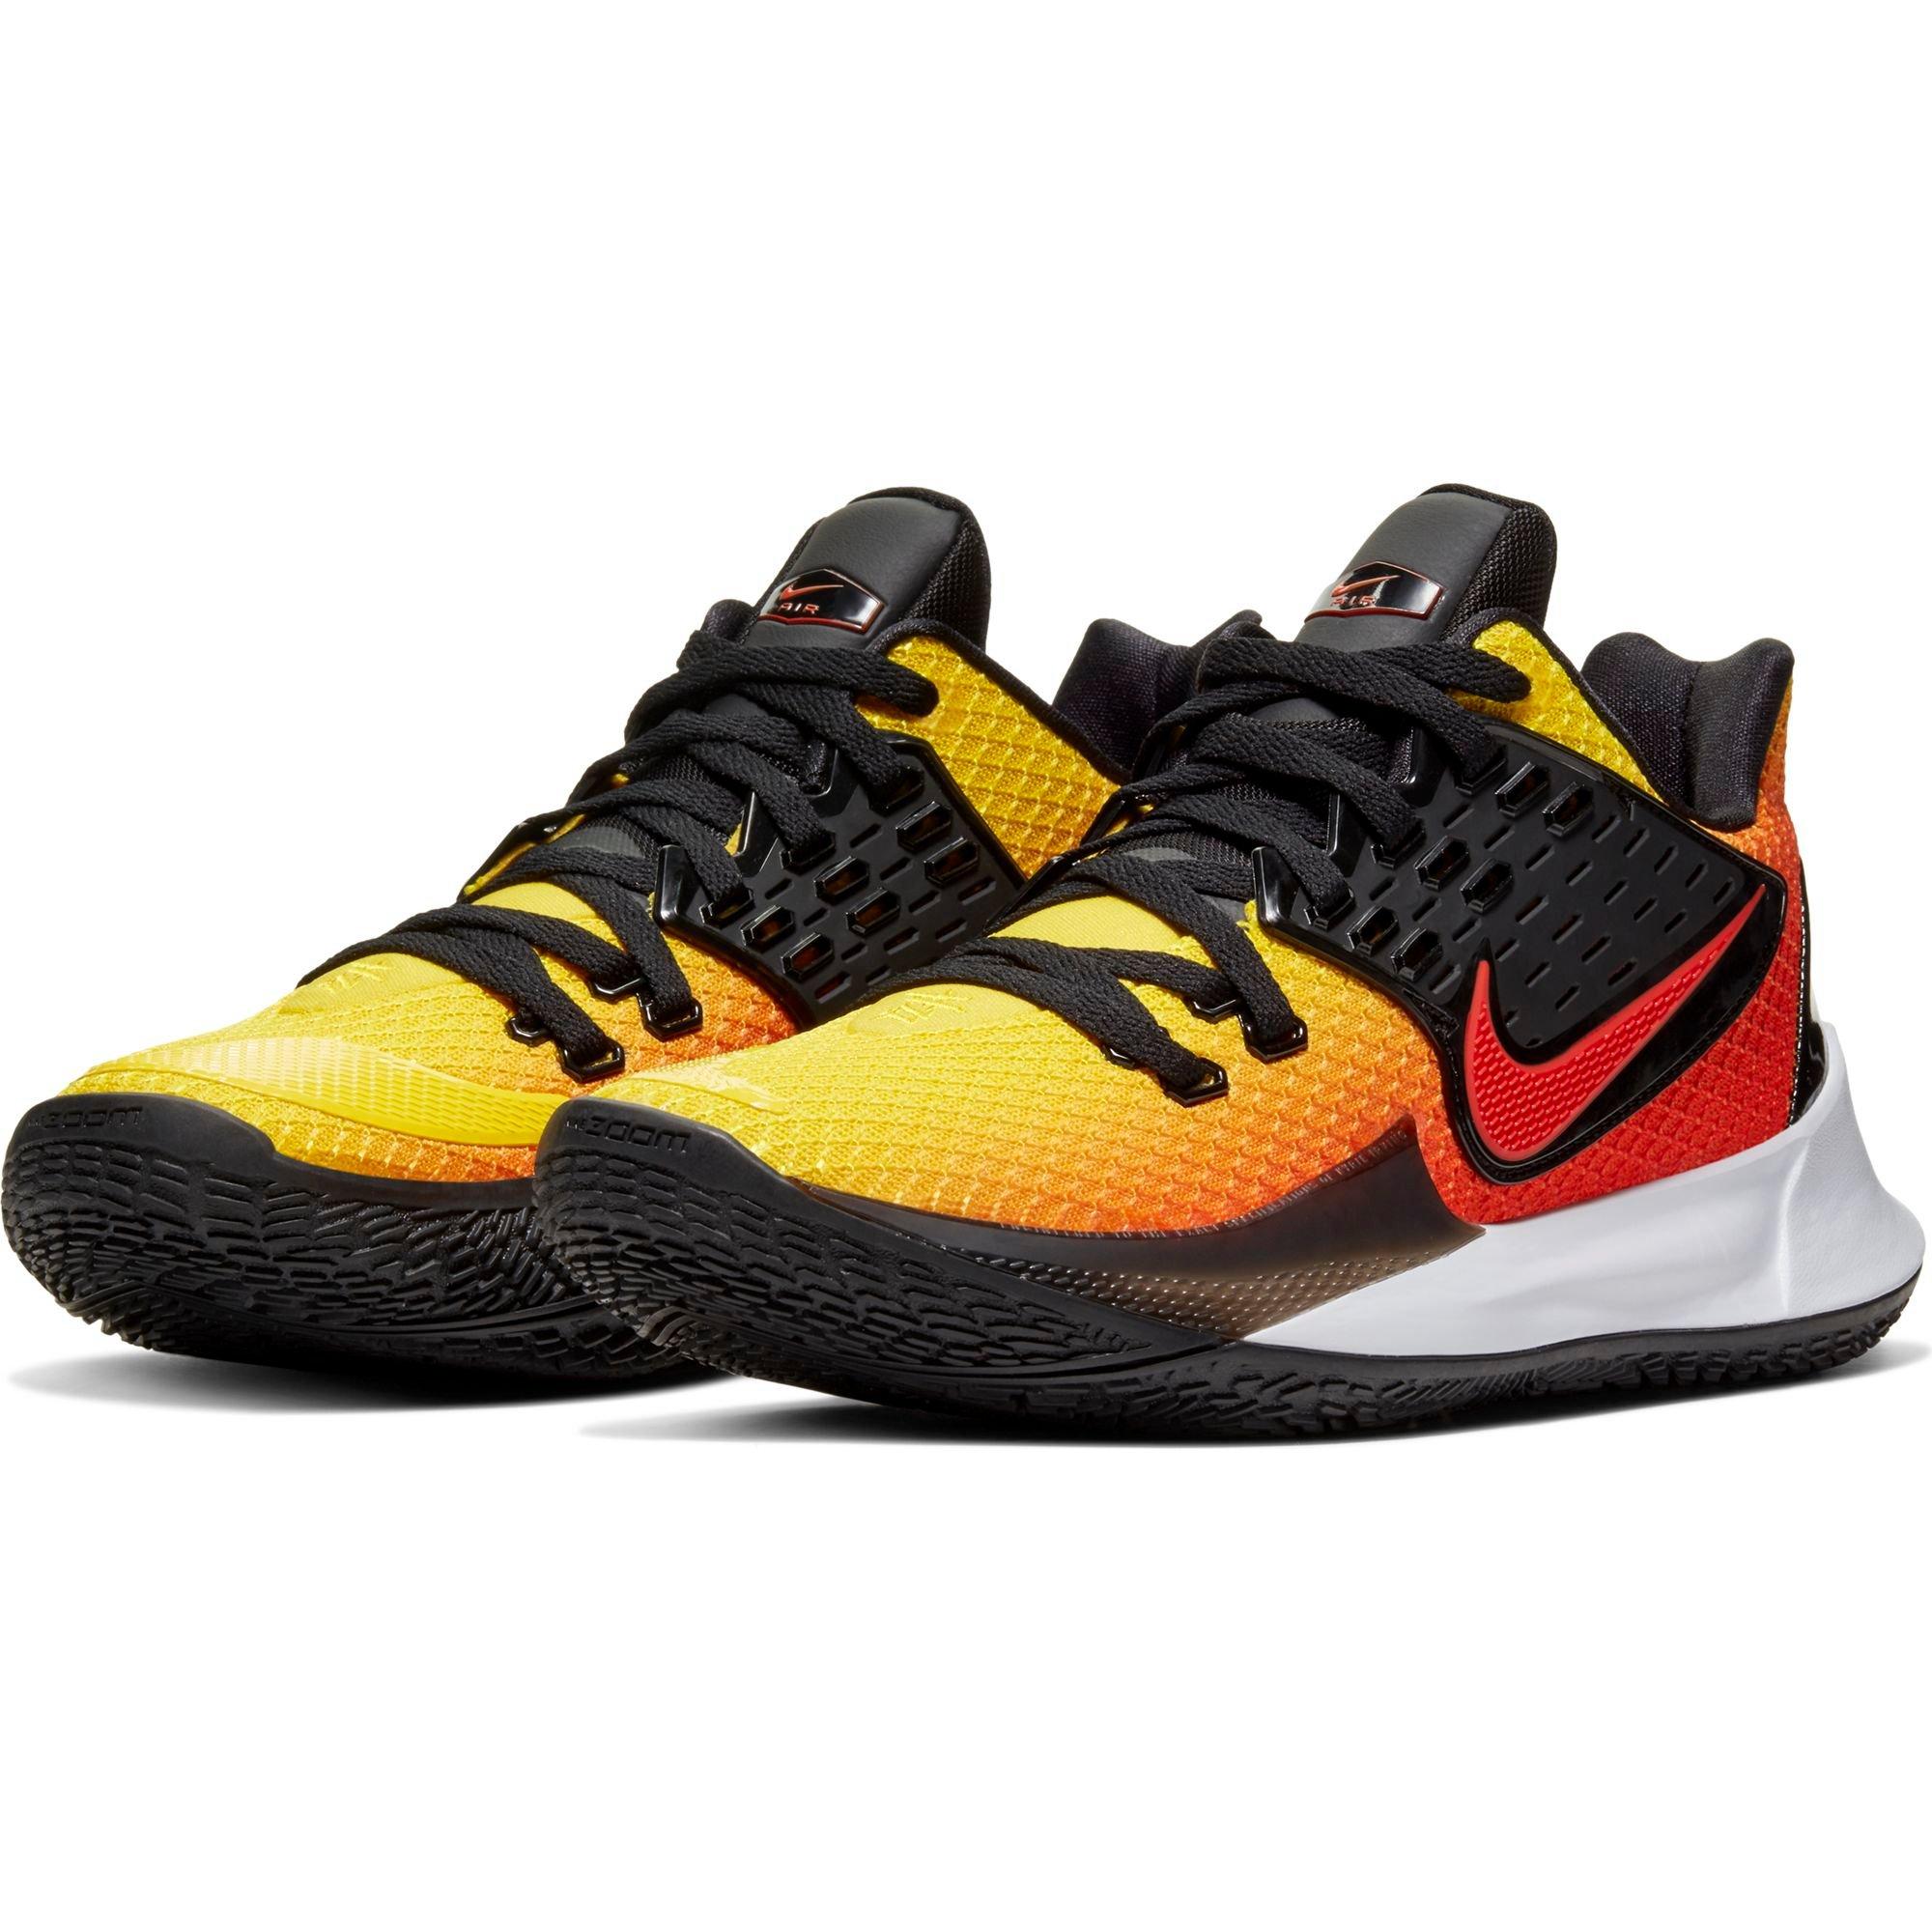 kyrie low 2 team orange chile red